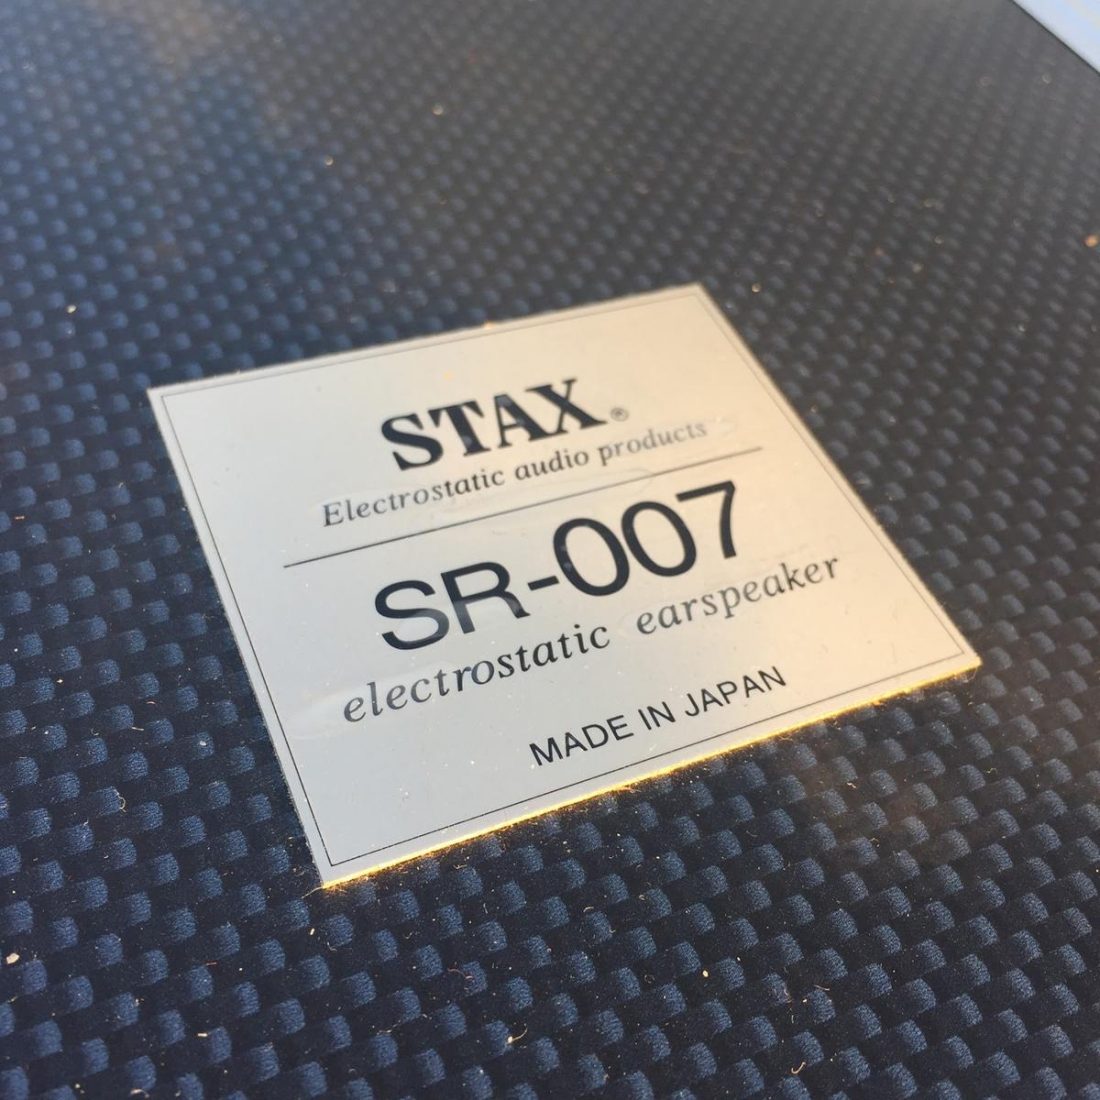 The label on the SR-007 MK1's case